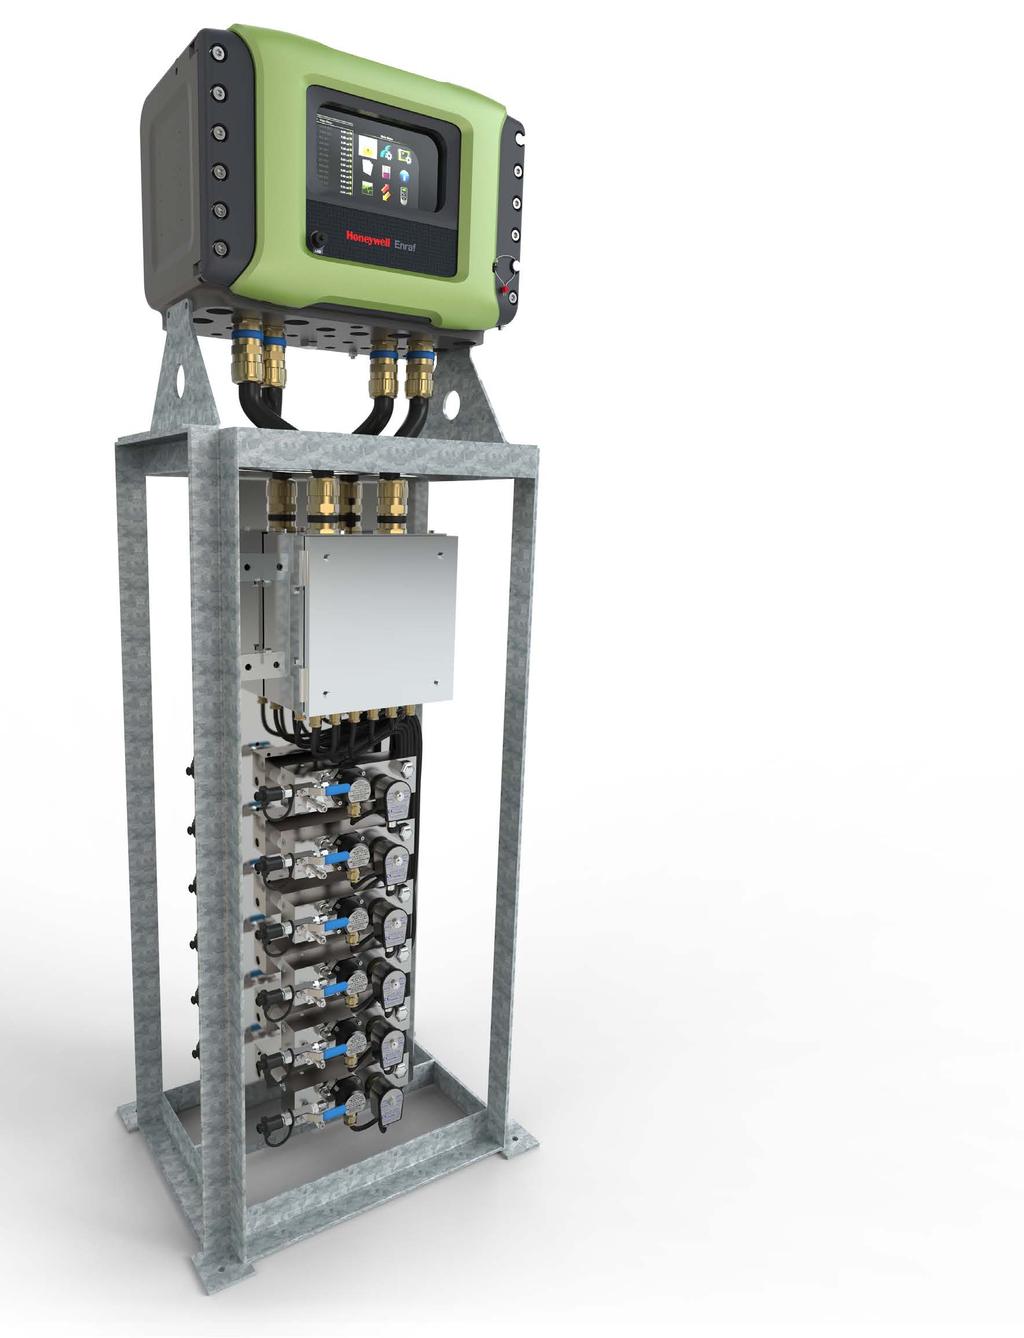 Man versus Machine Get hands on with our demo display at stand E22 and see for yourself how Fusion4 makes the complex simple LOADING SOLUTIONS Honeywell Enraf Fusion4 range provides a complete